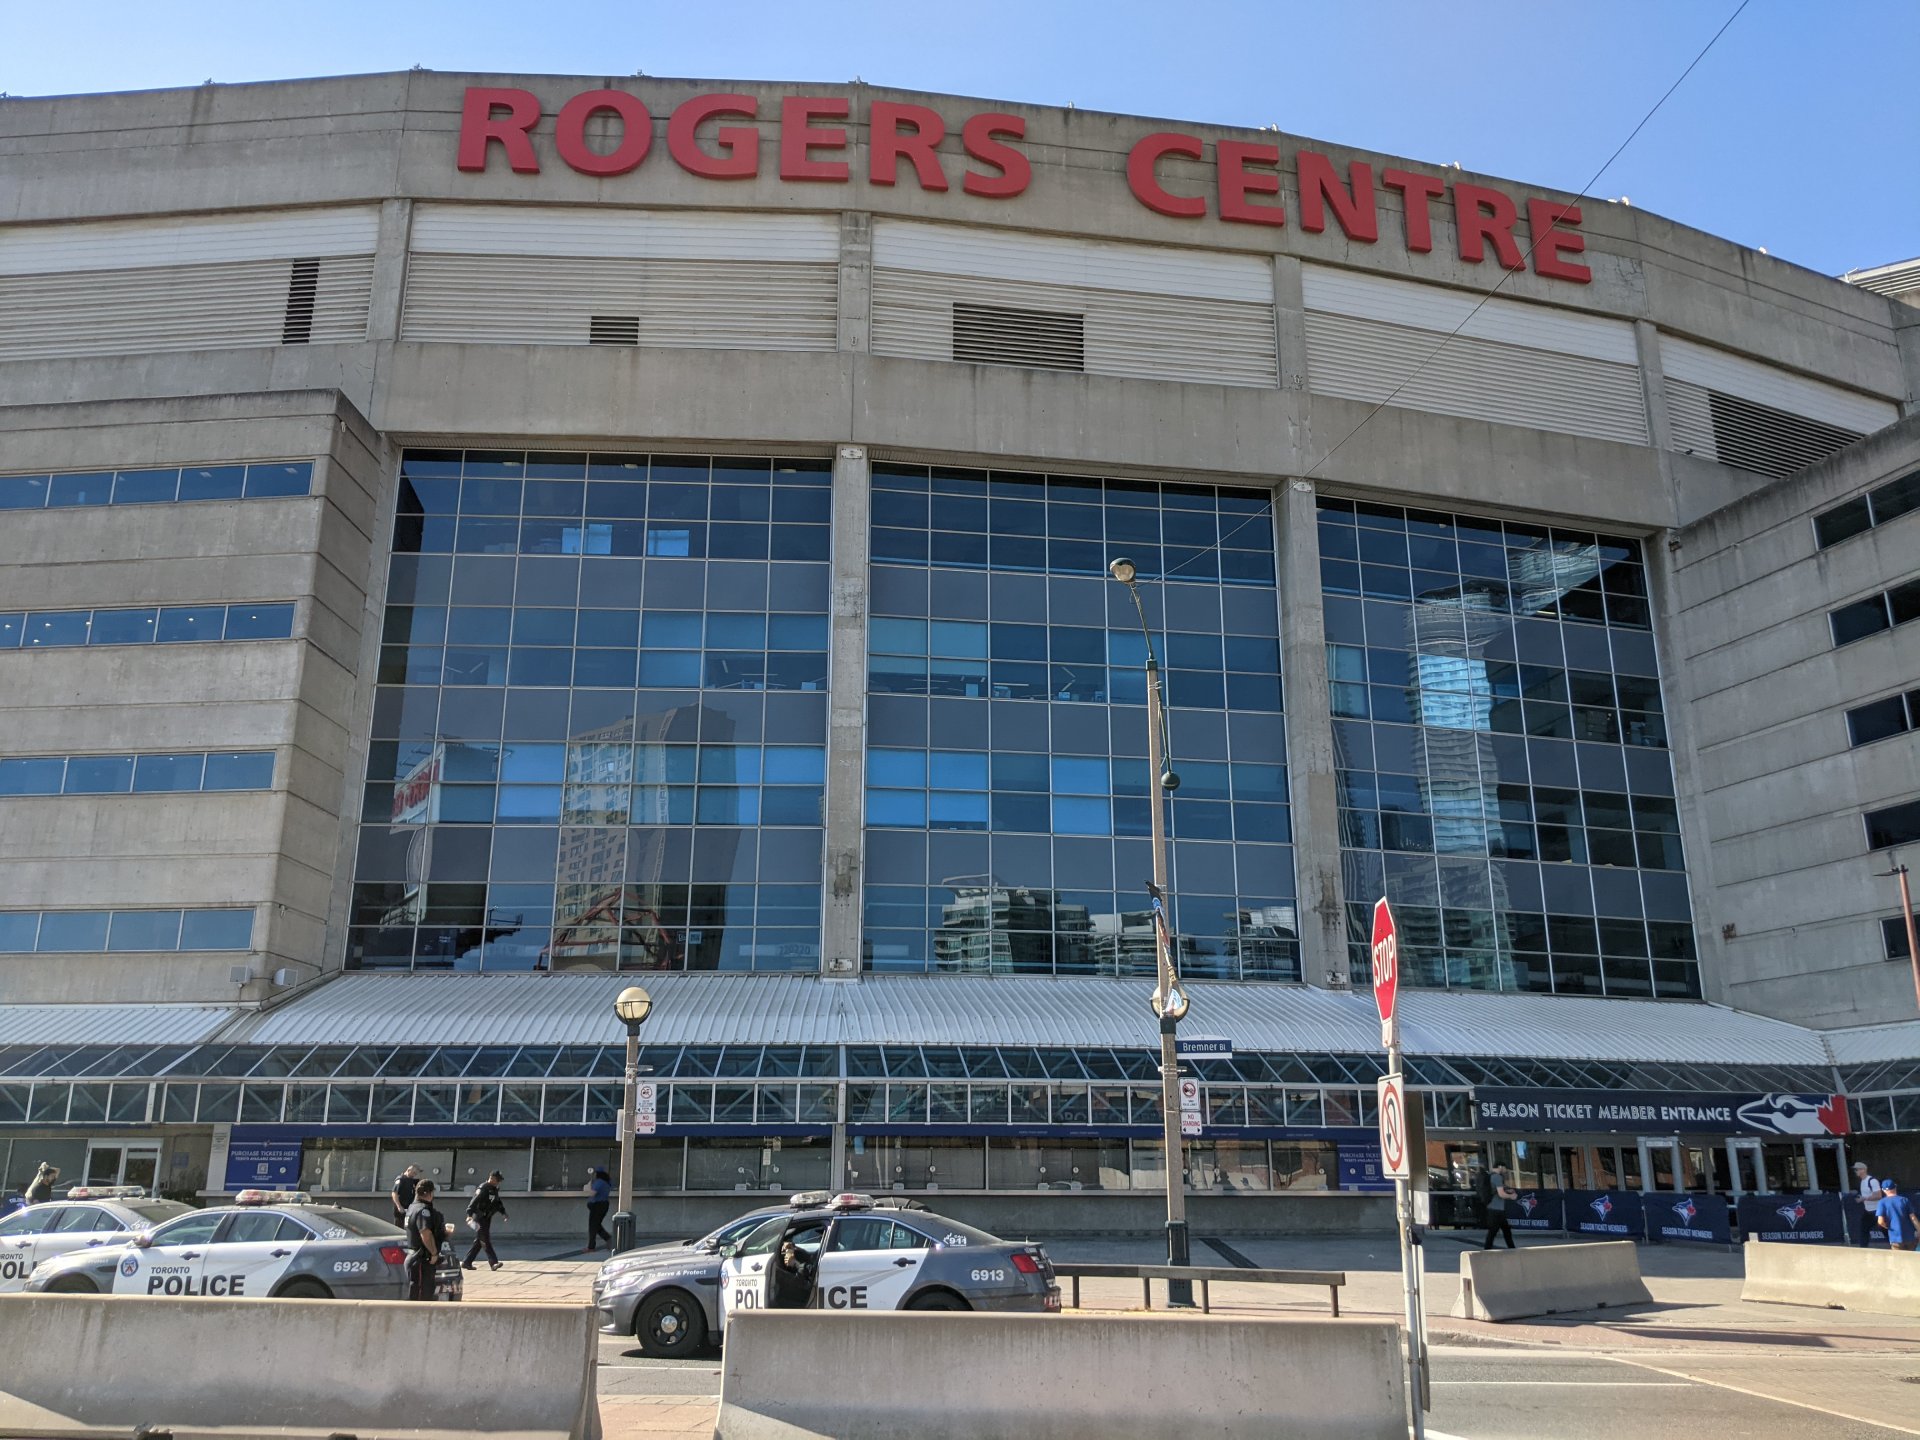 Rogers Centre, which was originally known as SkyDome, has been home to the Toronto Blue Jays since 1989.